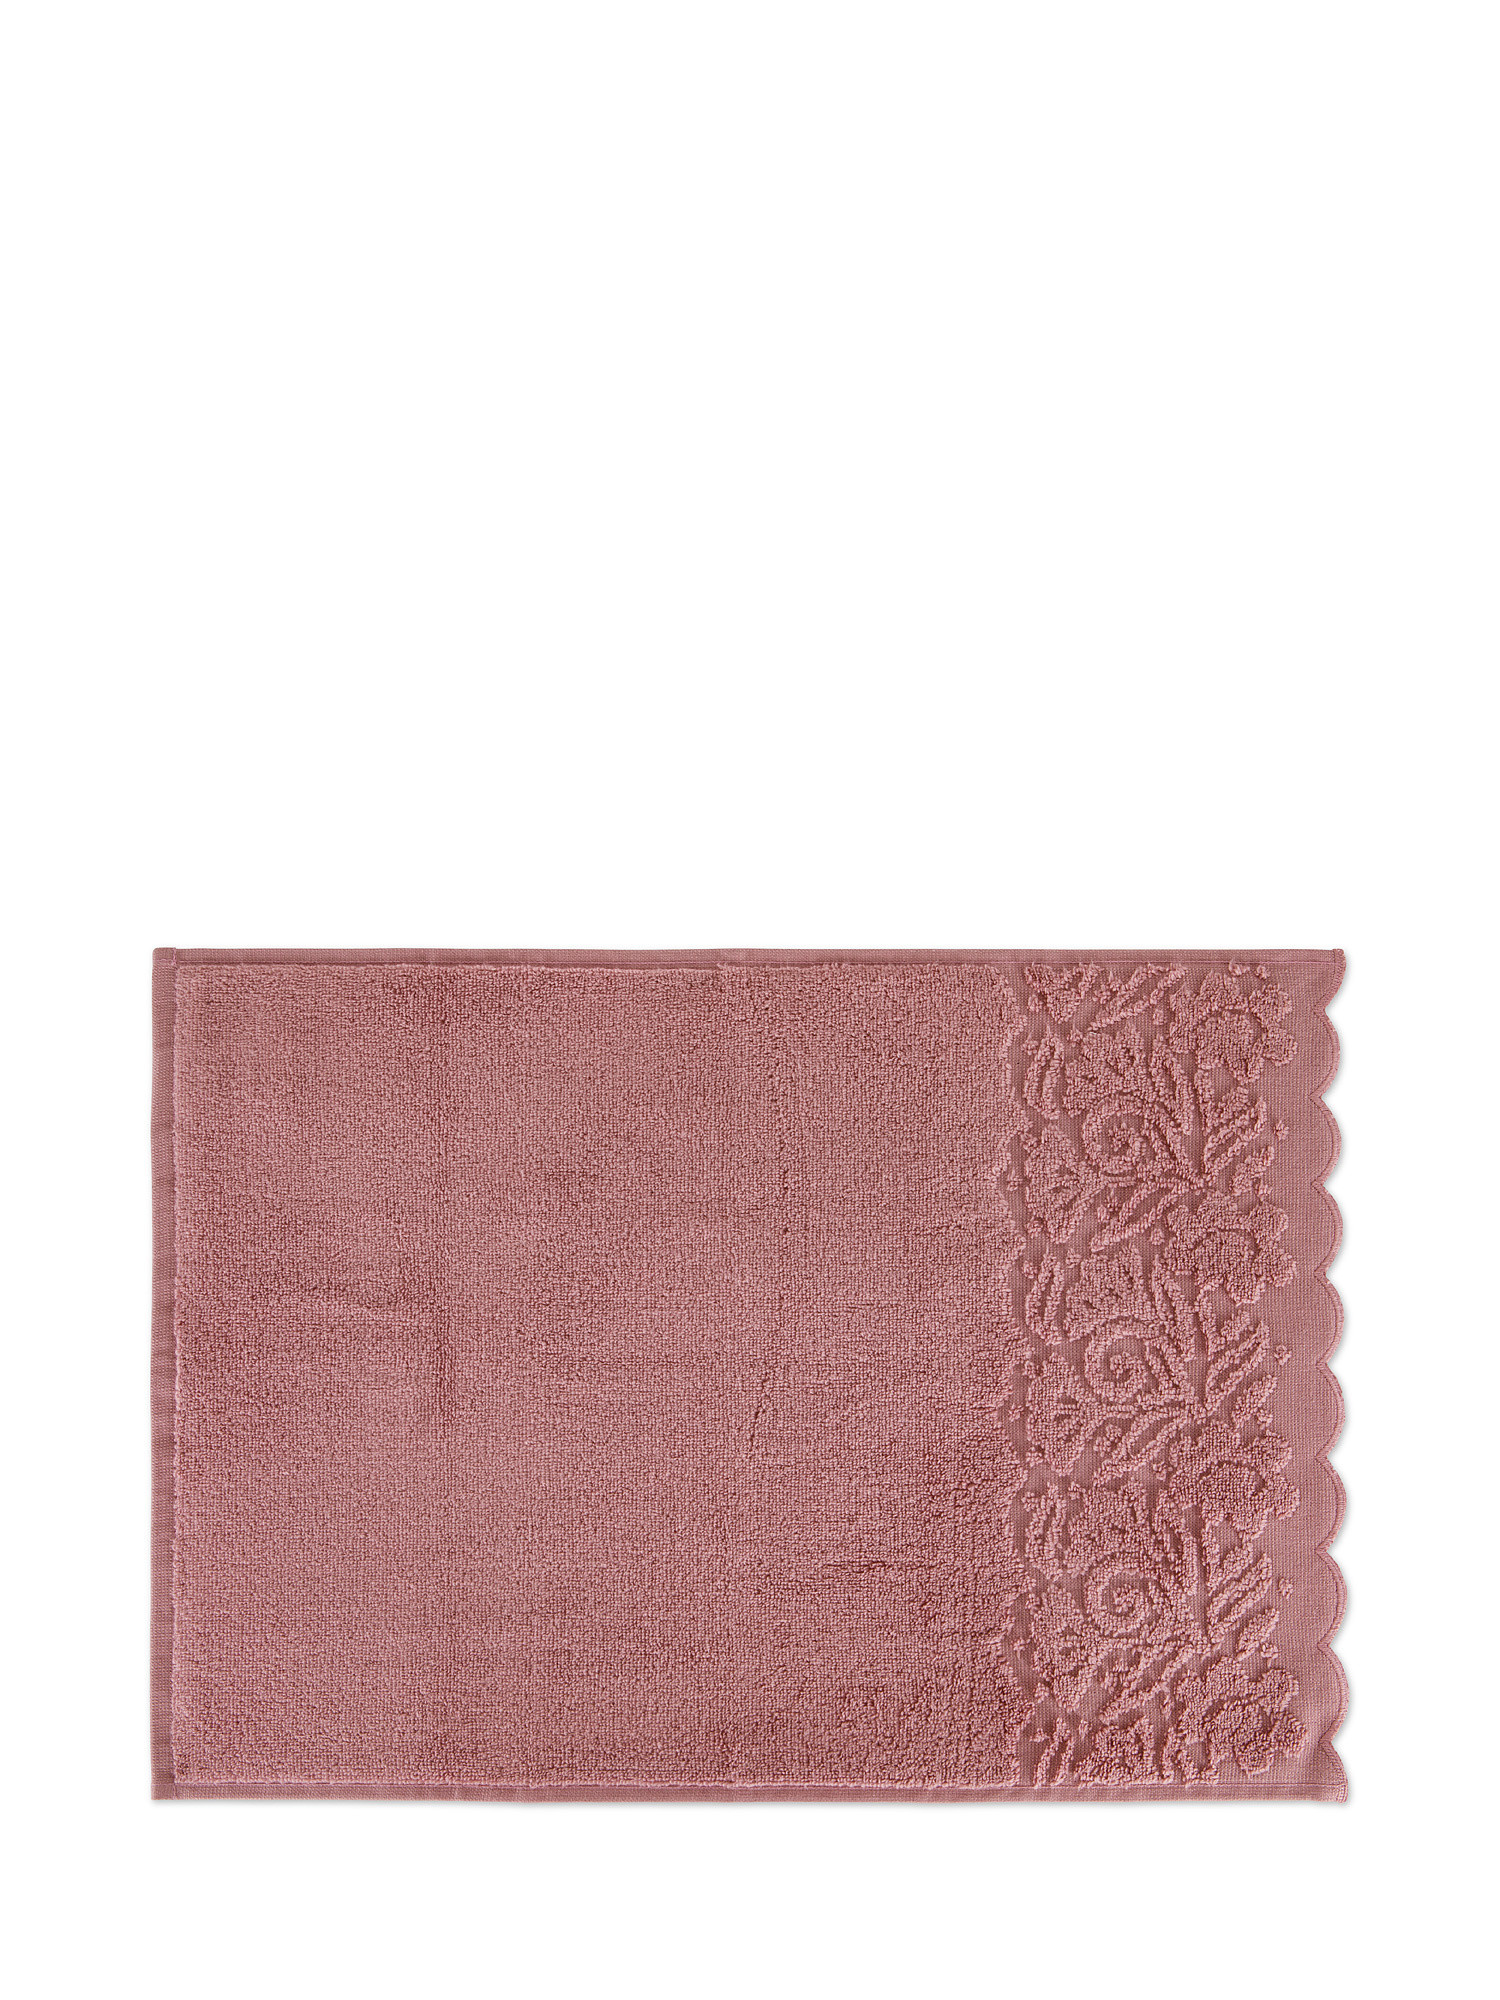 Pure cotton towel with jacquard border, Pink, large image number 1